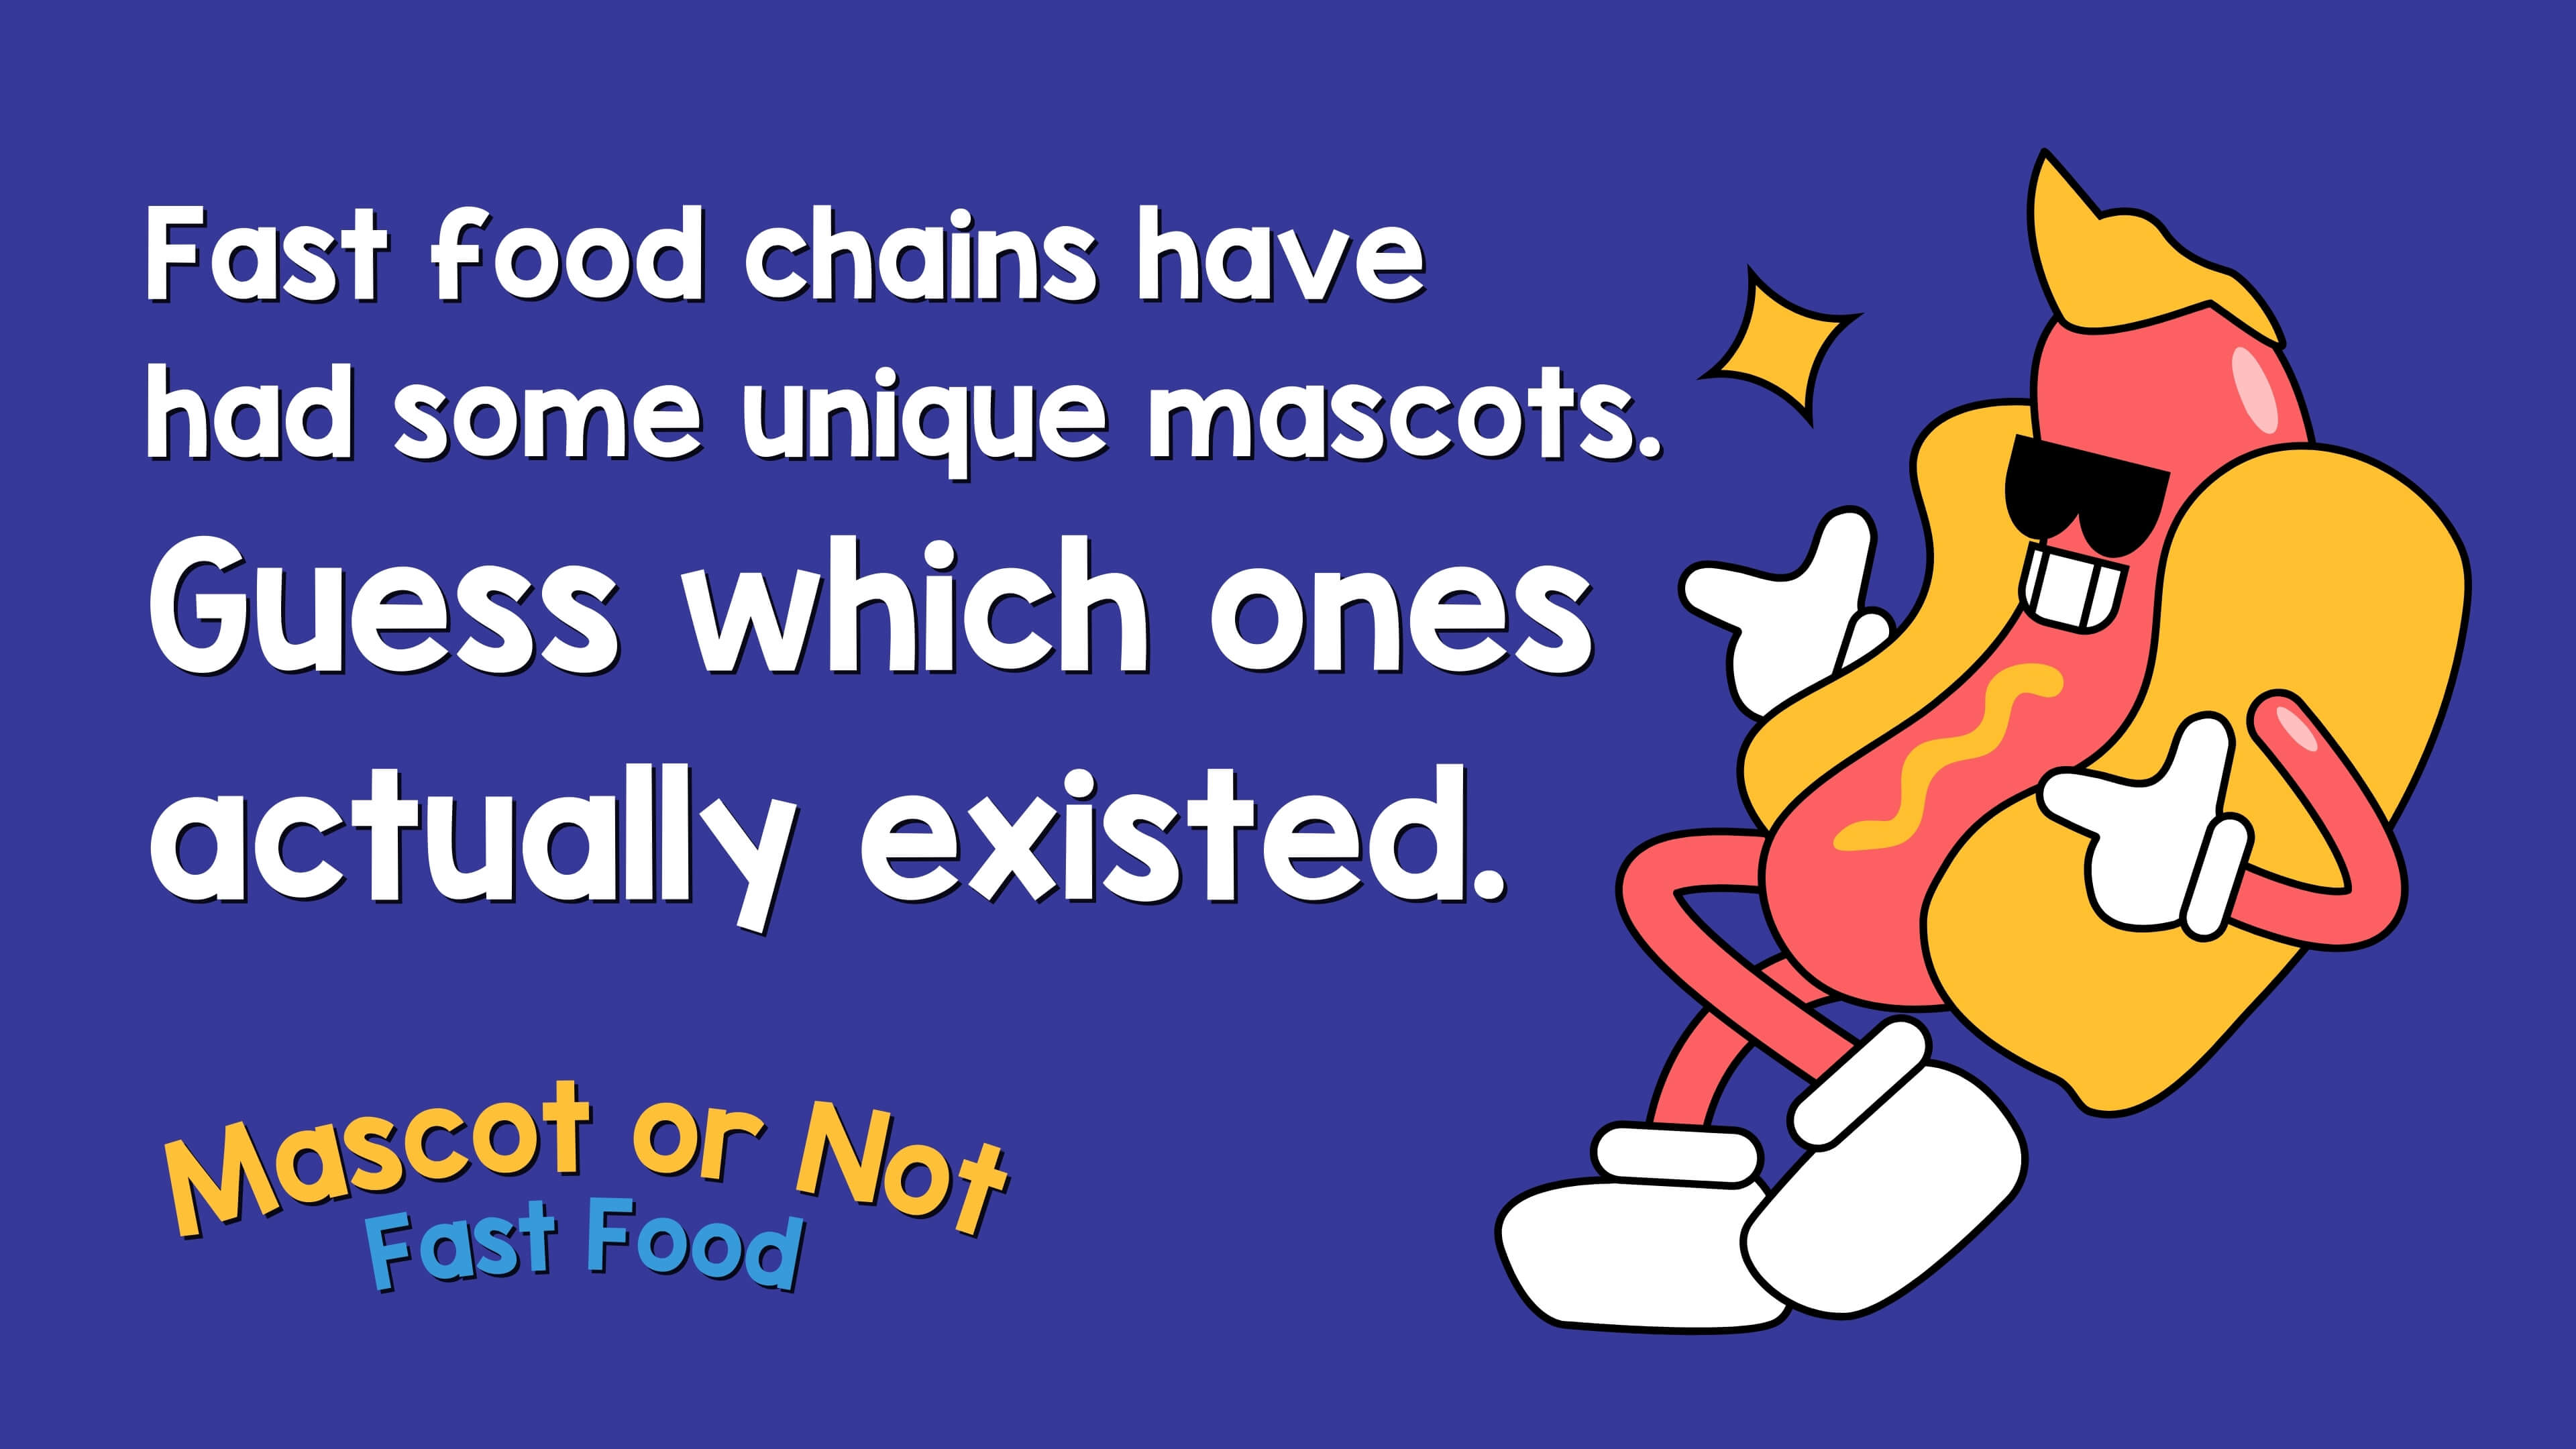 Mascot or Not: Fast Food